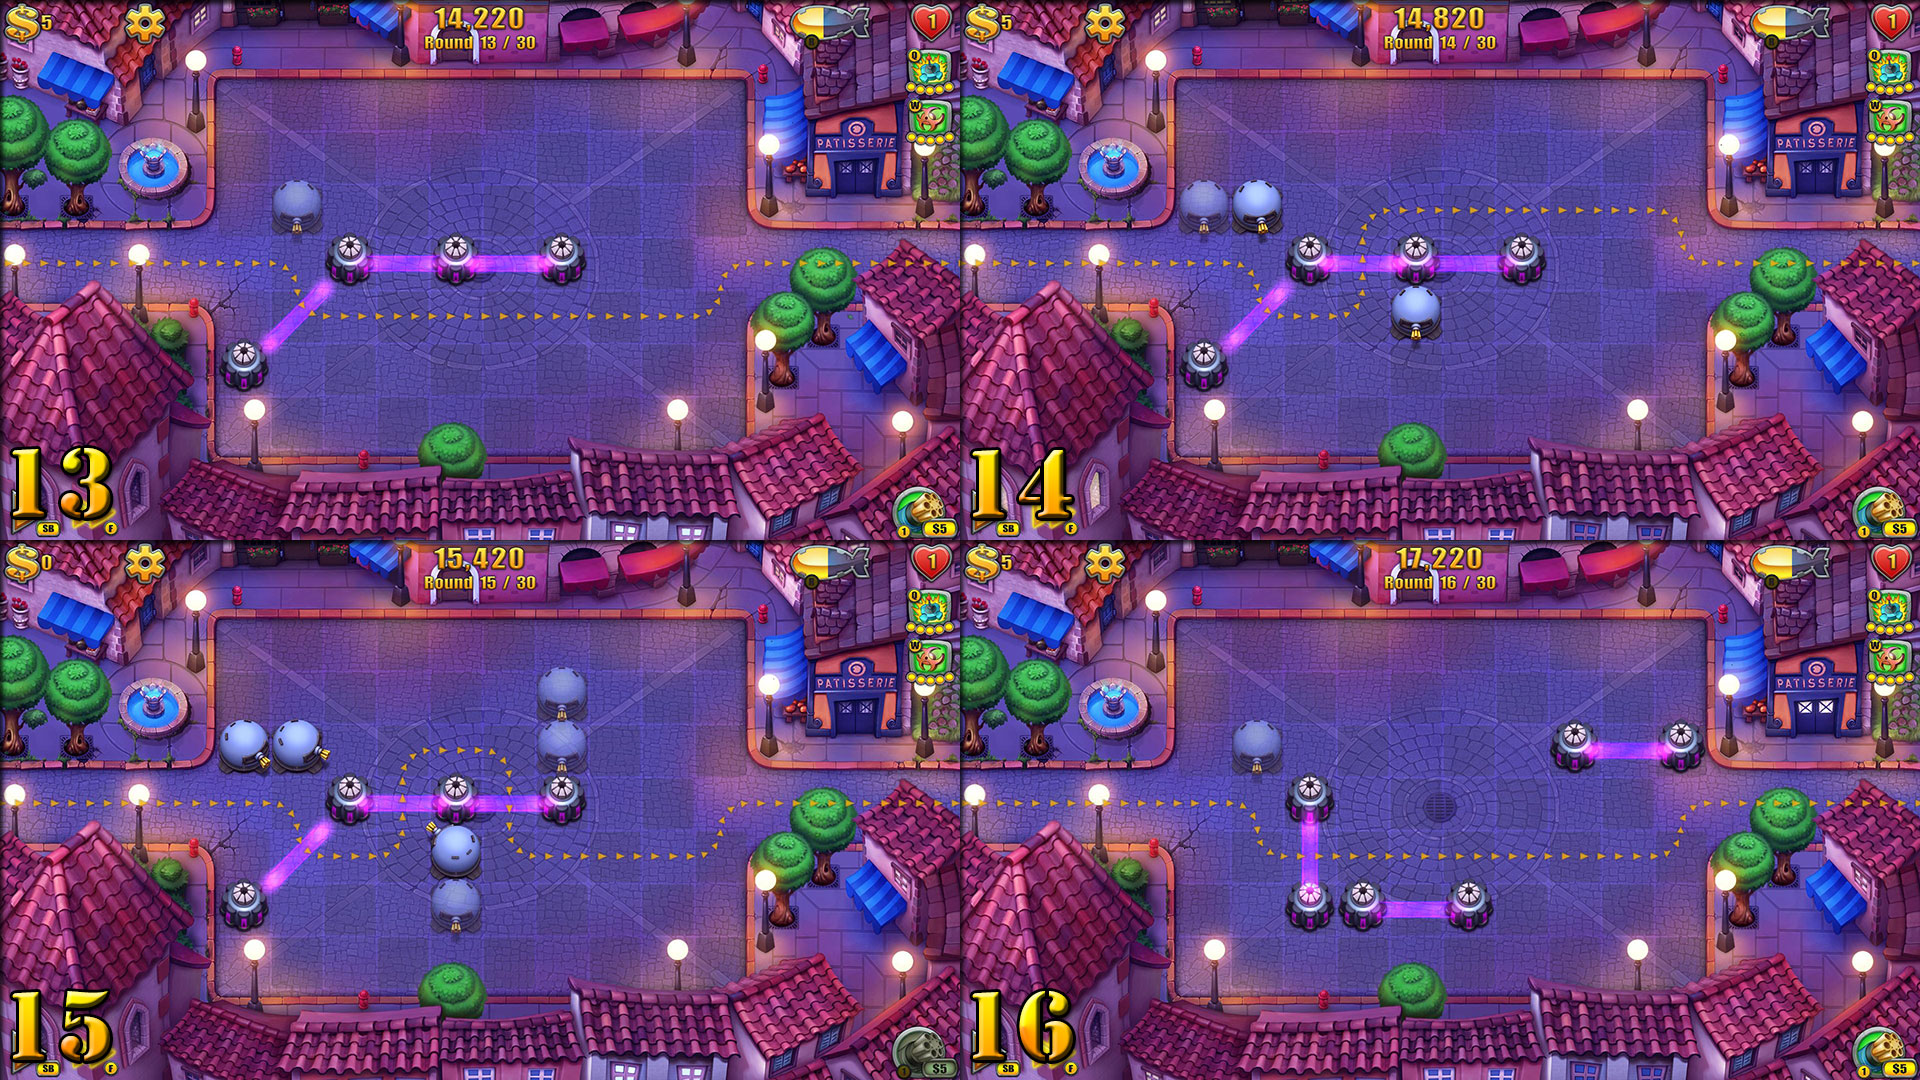 You’ll be a master tower trader by the end of this puzzle map.